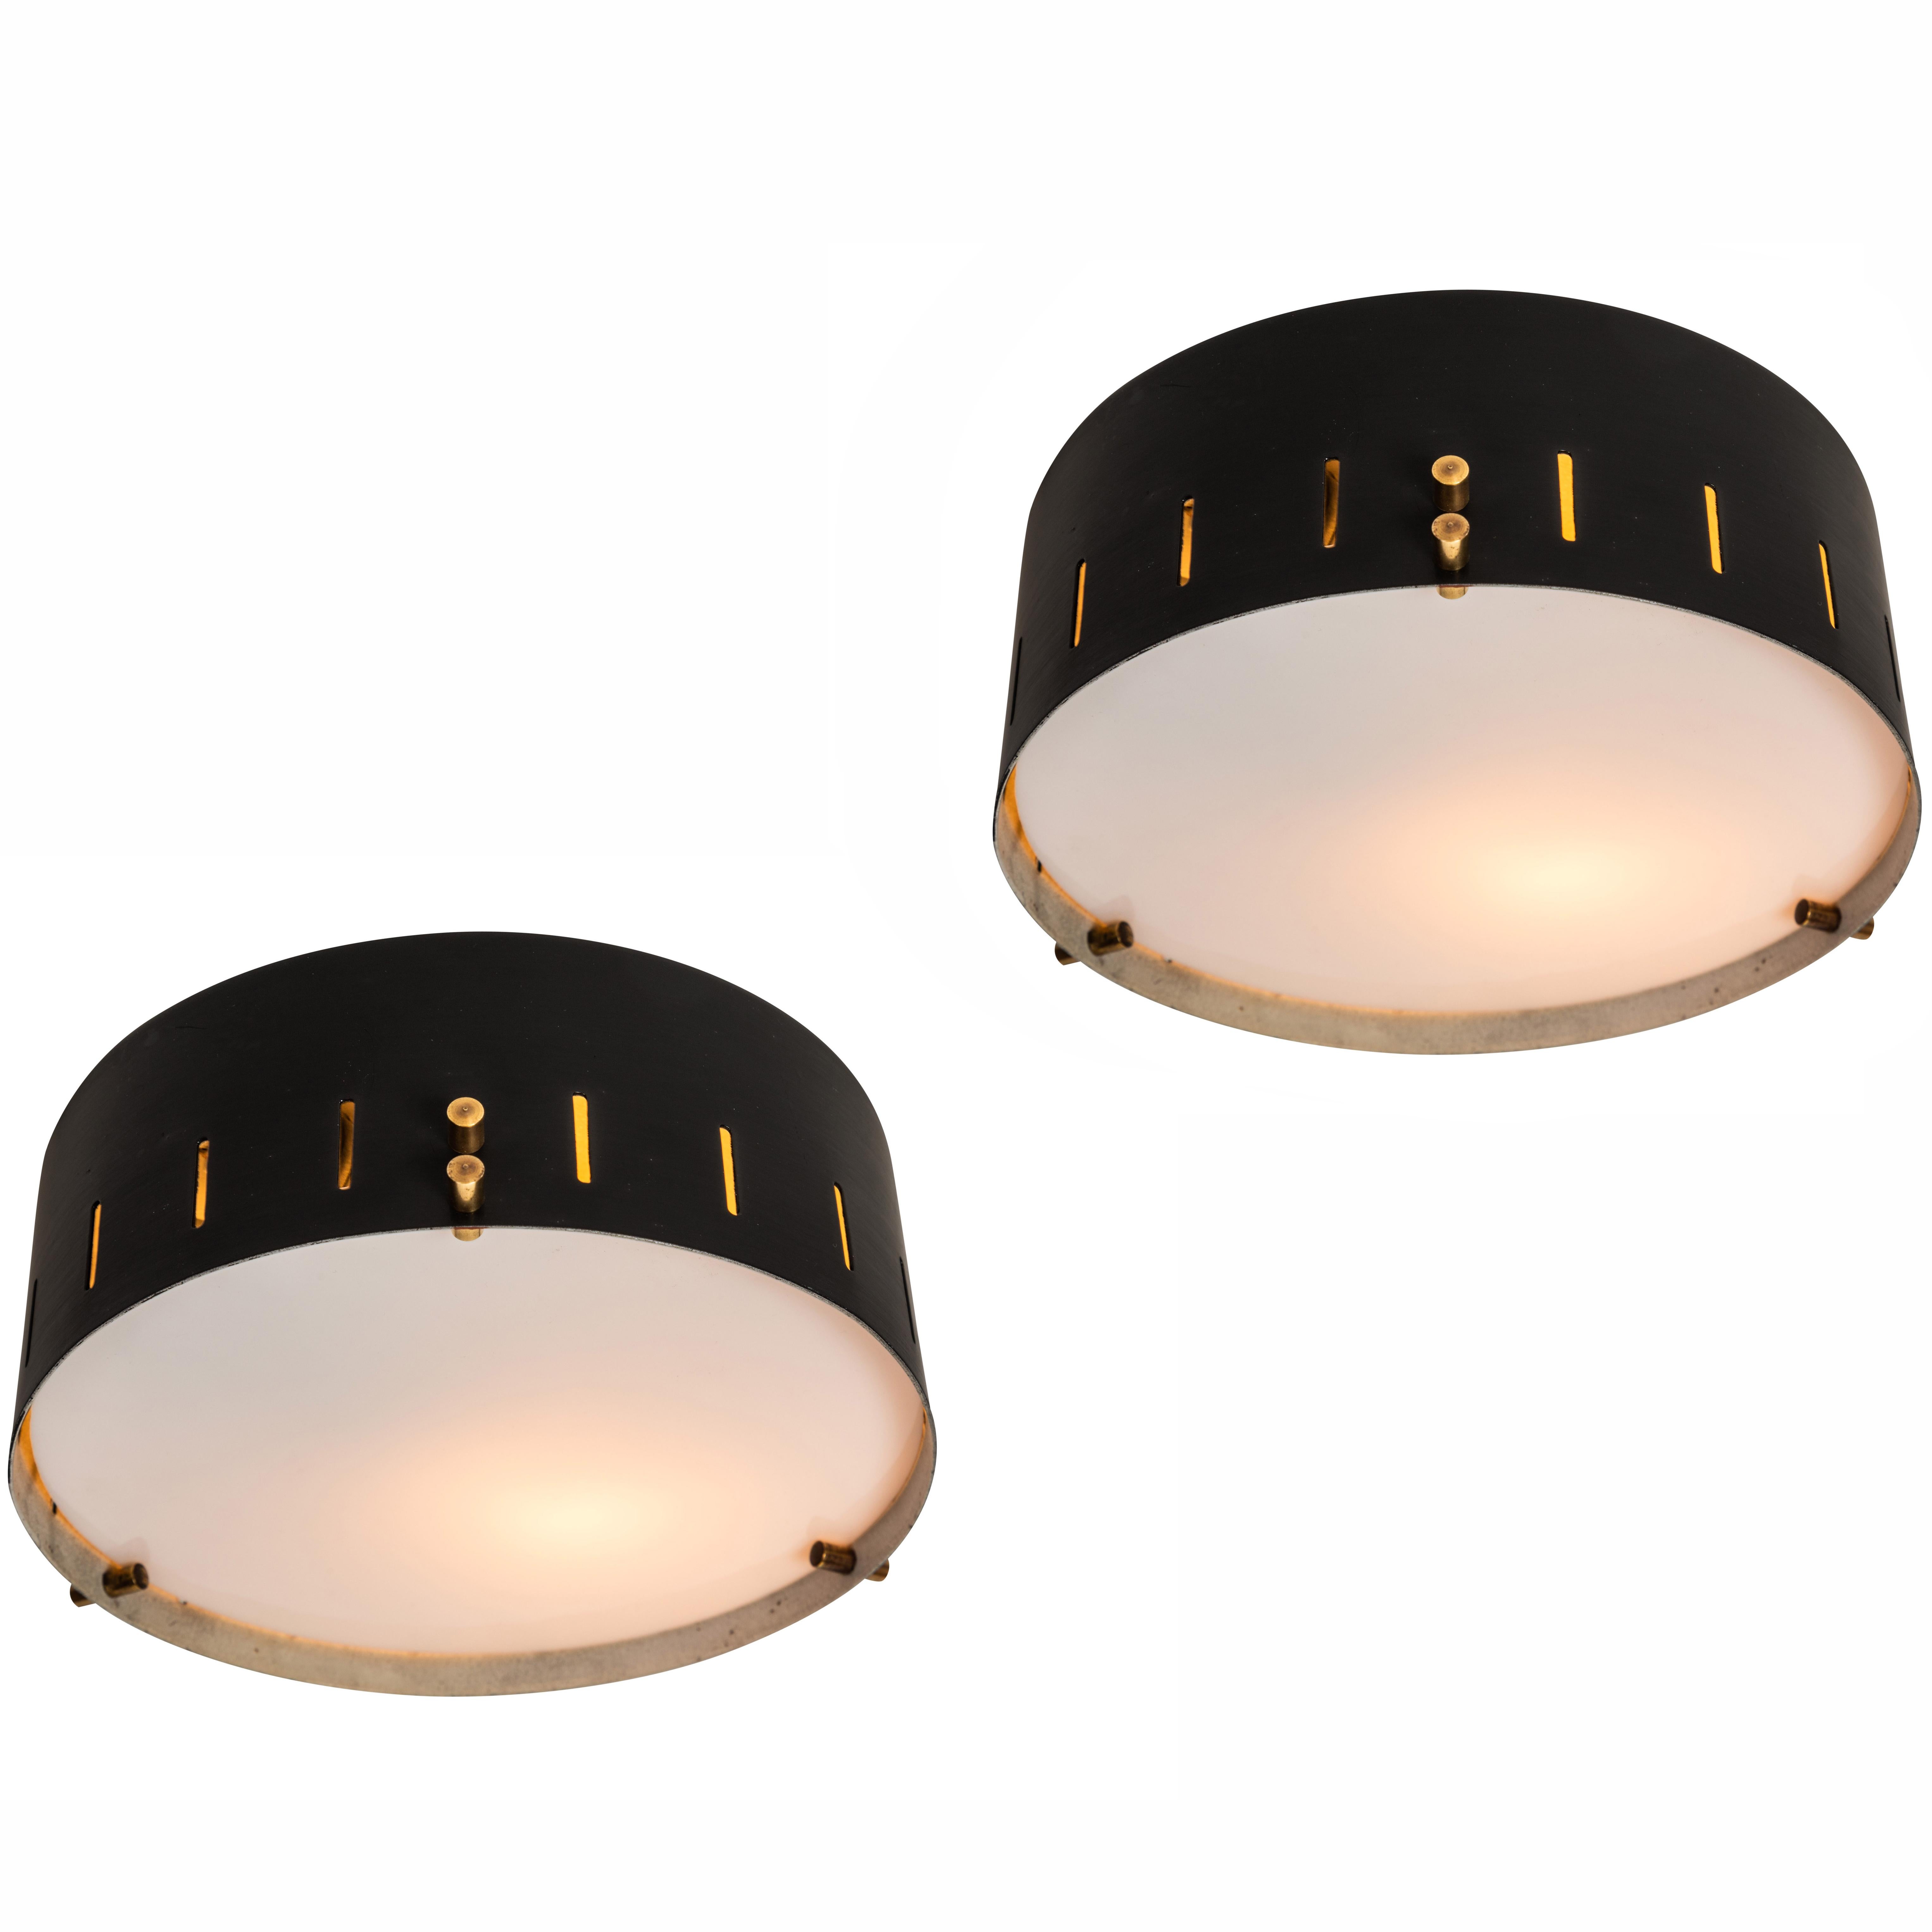 1960s Bruno Gatta wall or ceiling light for Stilnovo. Executed in black painted metal with opaline glass and brass hardware. A sculptural and refined design characteristic of 1960s Italian design at its highest level.

Price is per item.